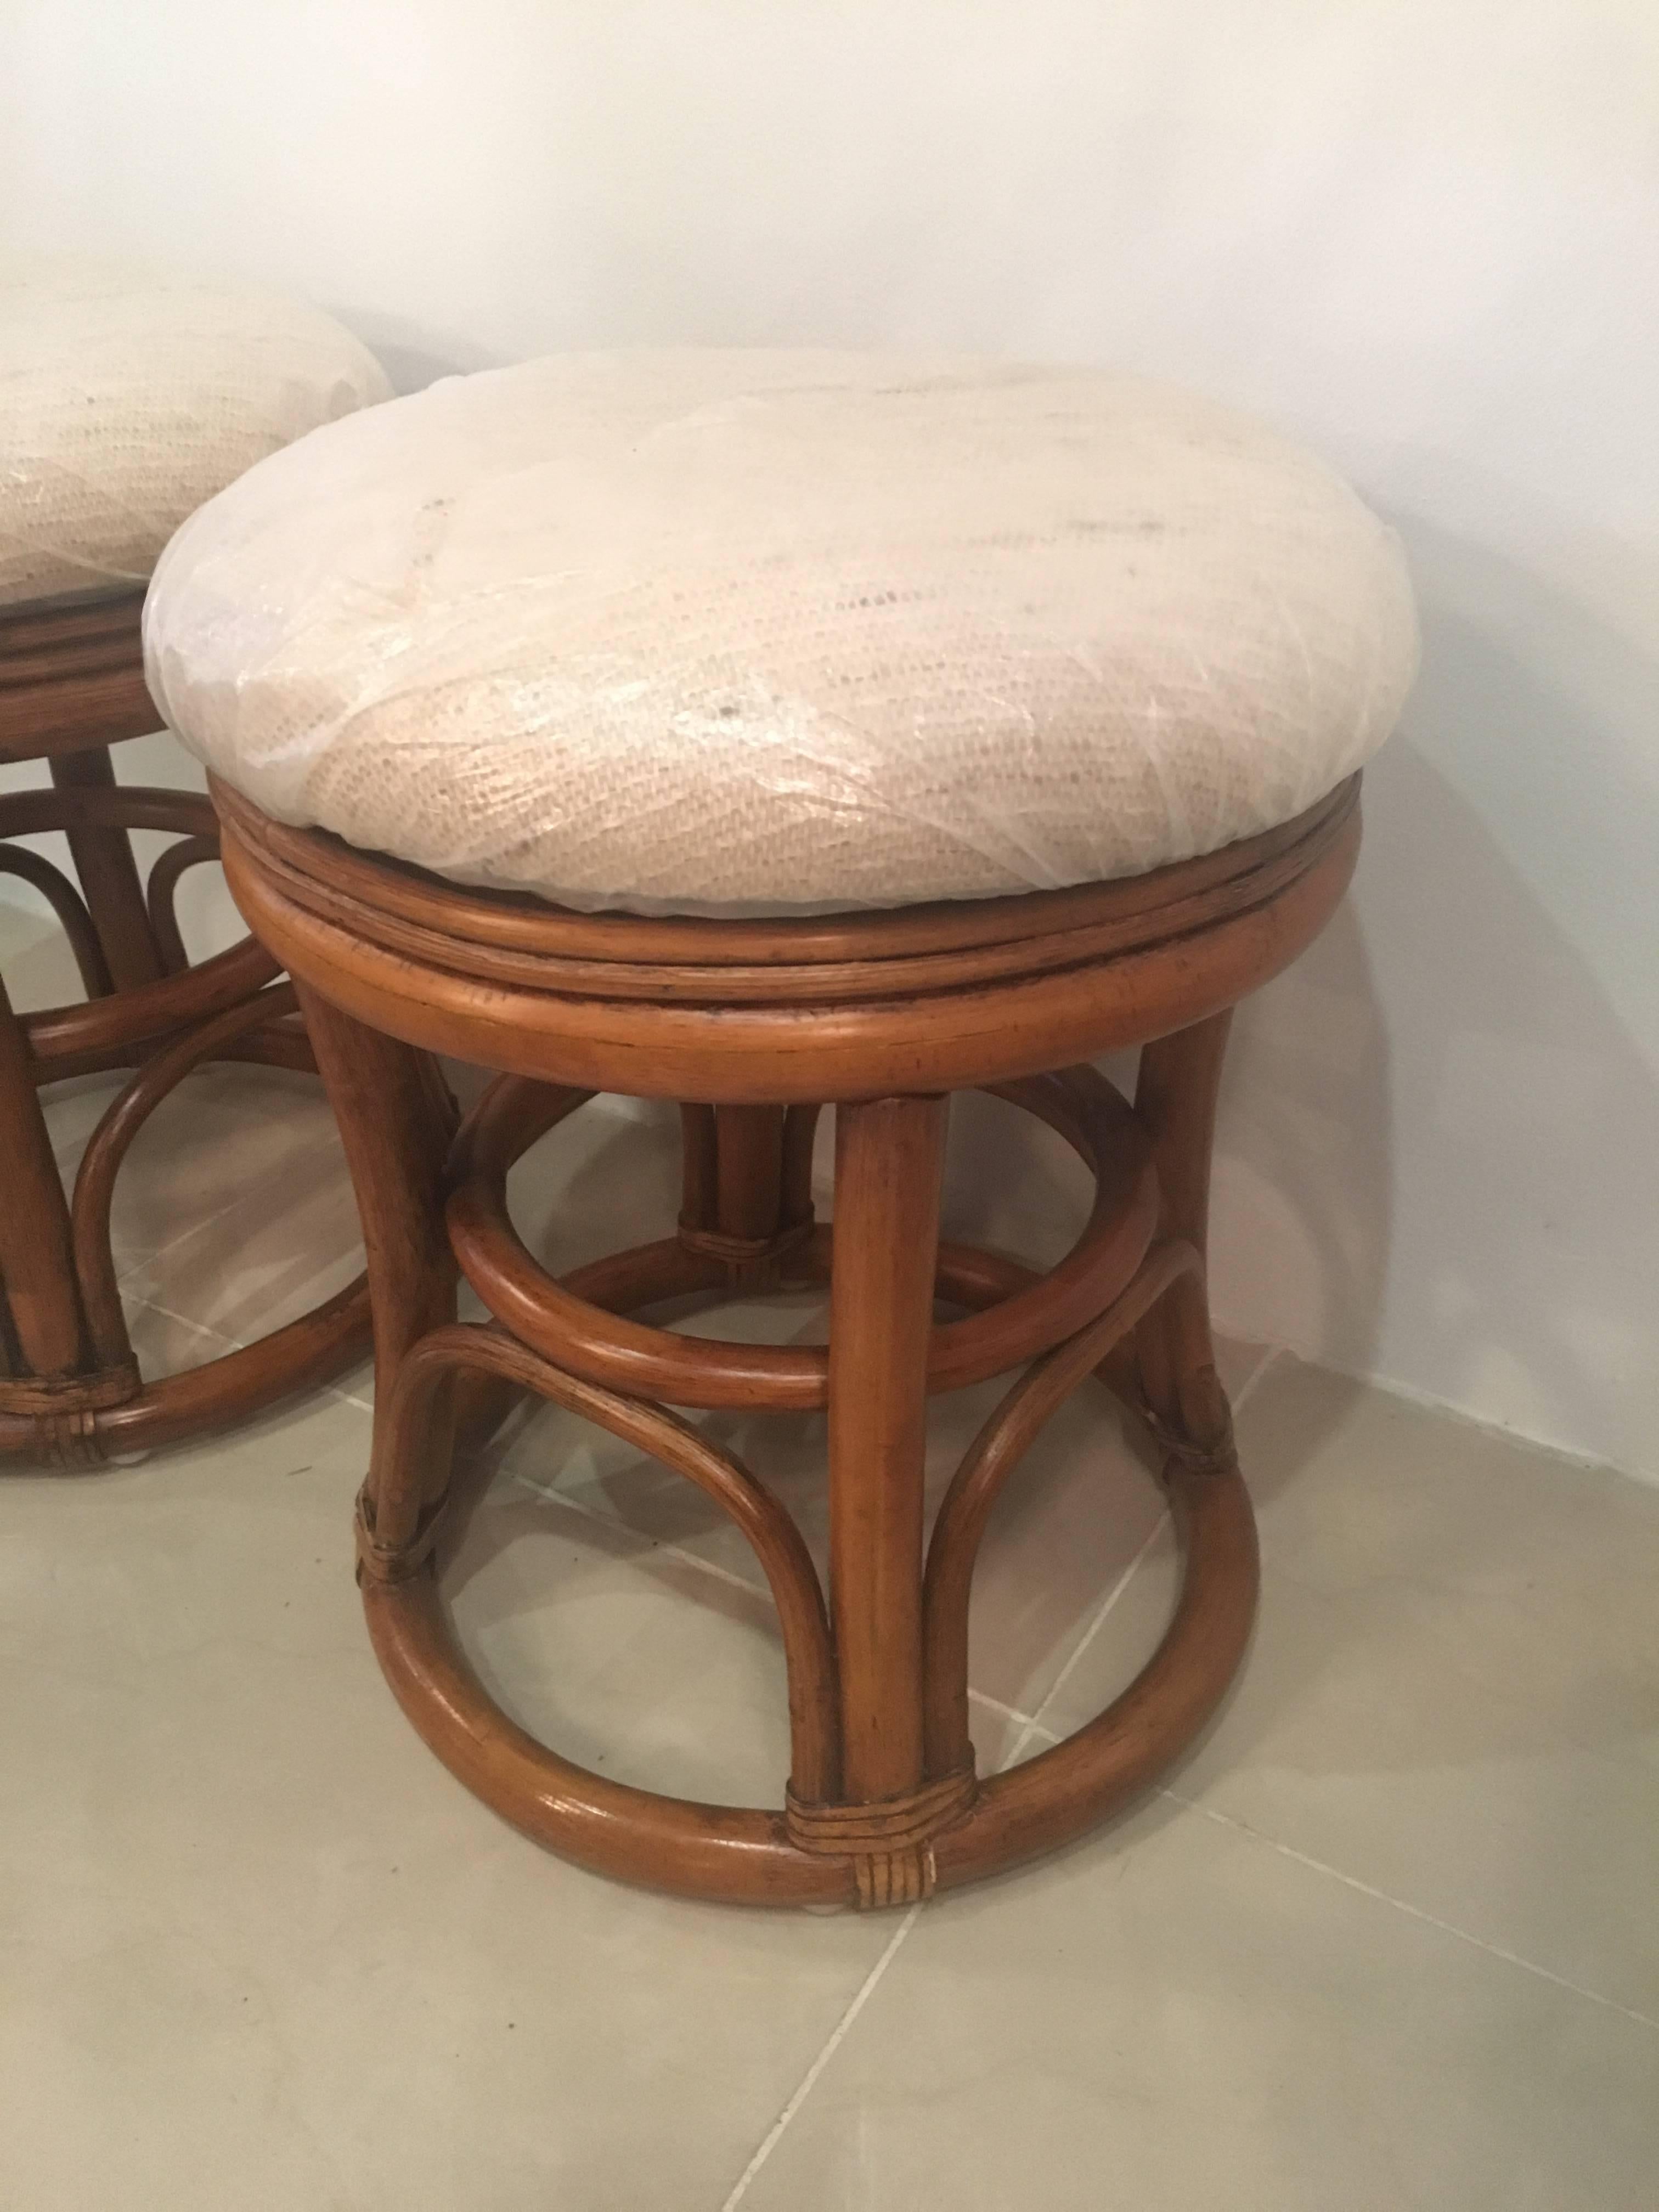 Indonesian Pair of Vintage Rattan Stools Benches Tropical Palm Beach